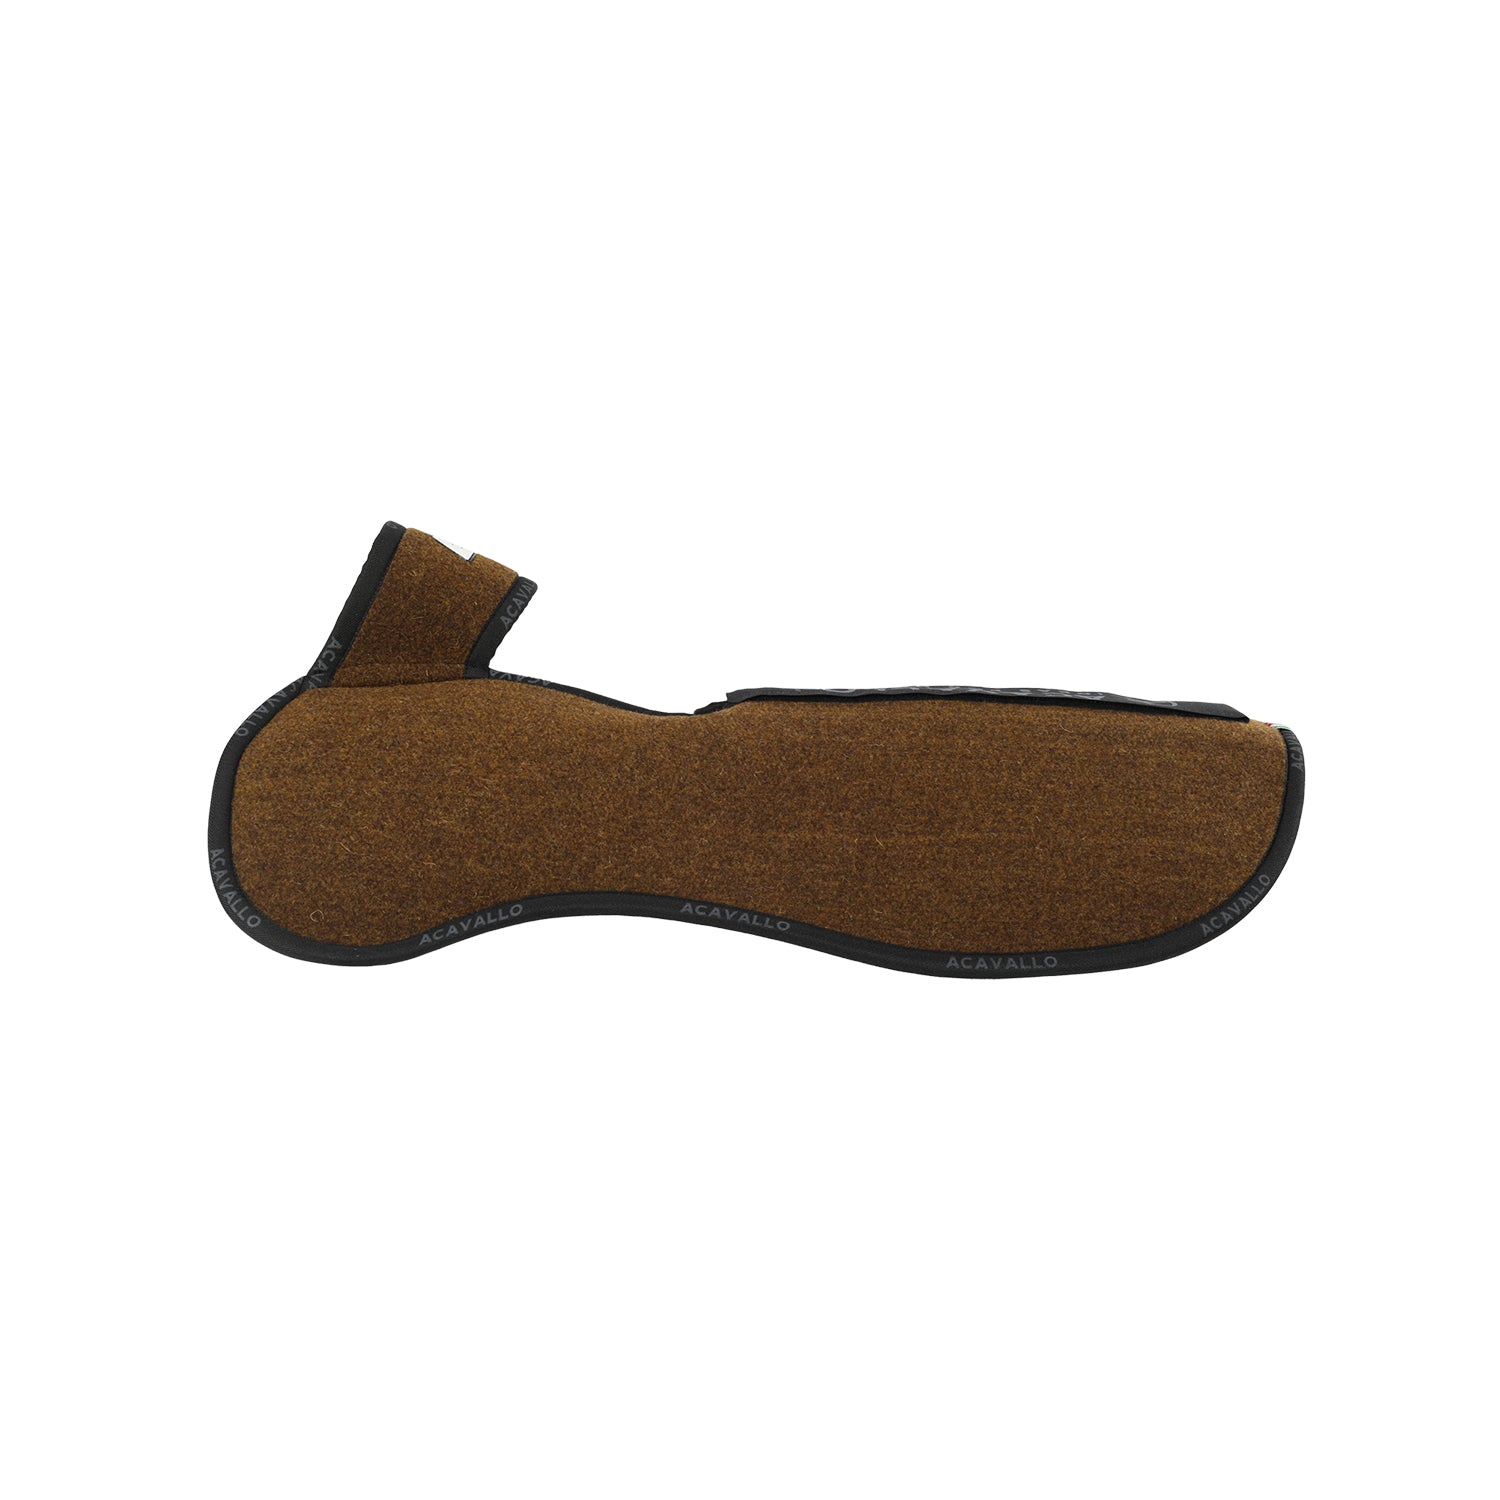 Pad WITHERS FREE POCKET CONFIGURATION PAD DOUBLE FELT WITH DOUBLE FELT - Reitstiefel Kandel - Dein Reitshop